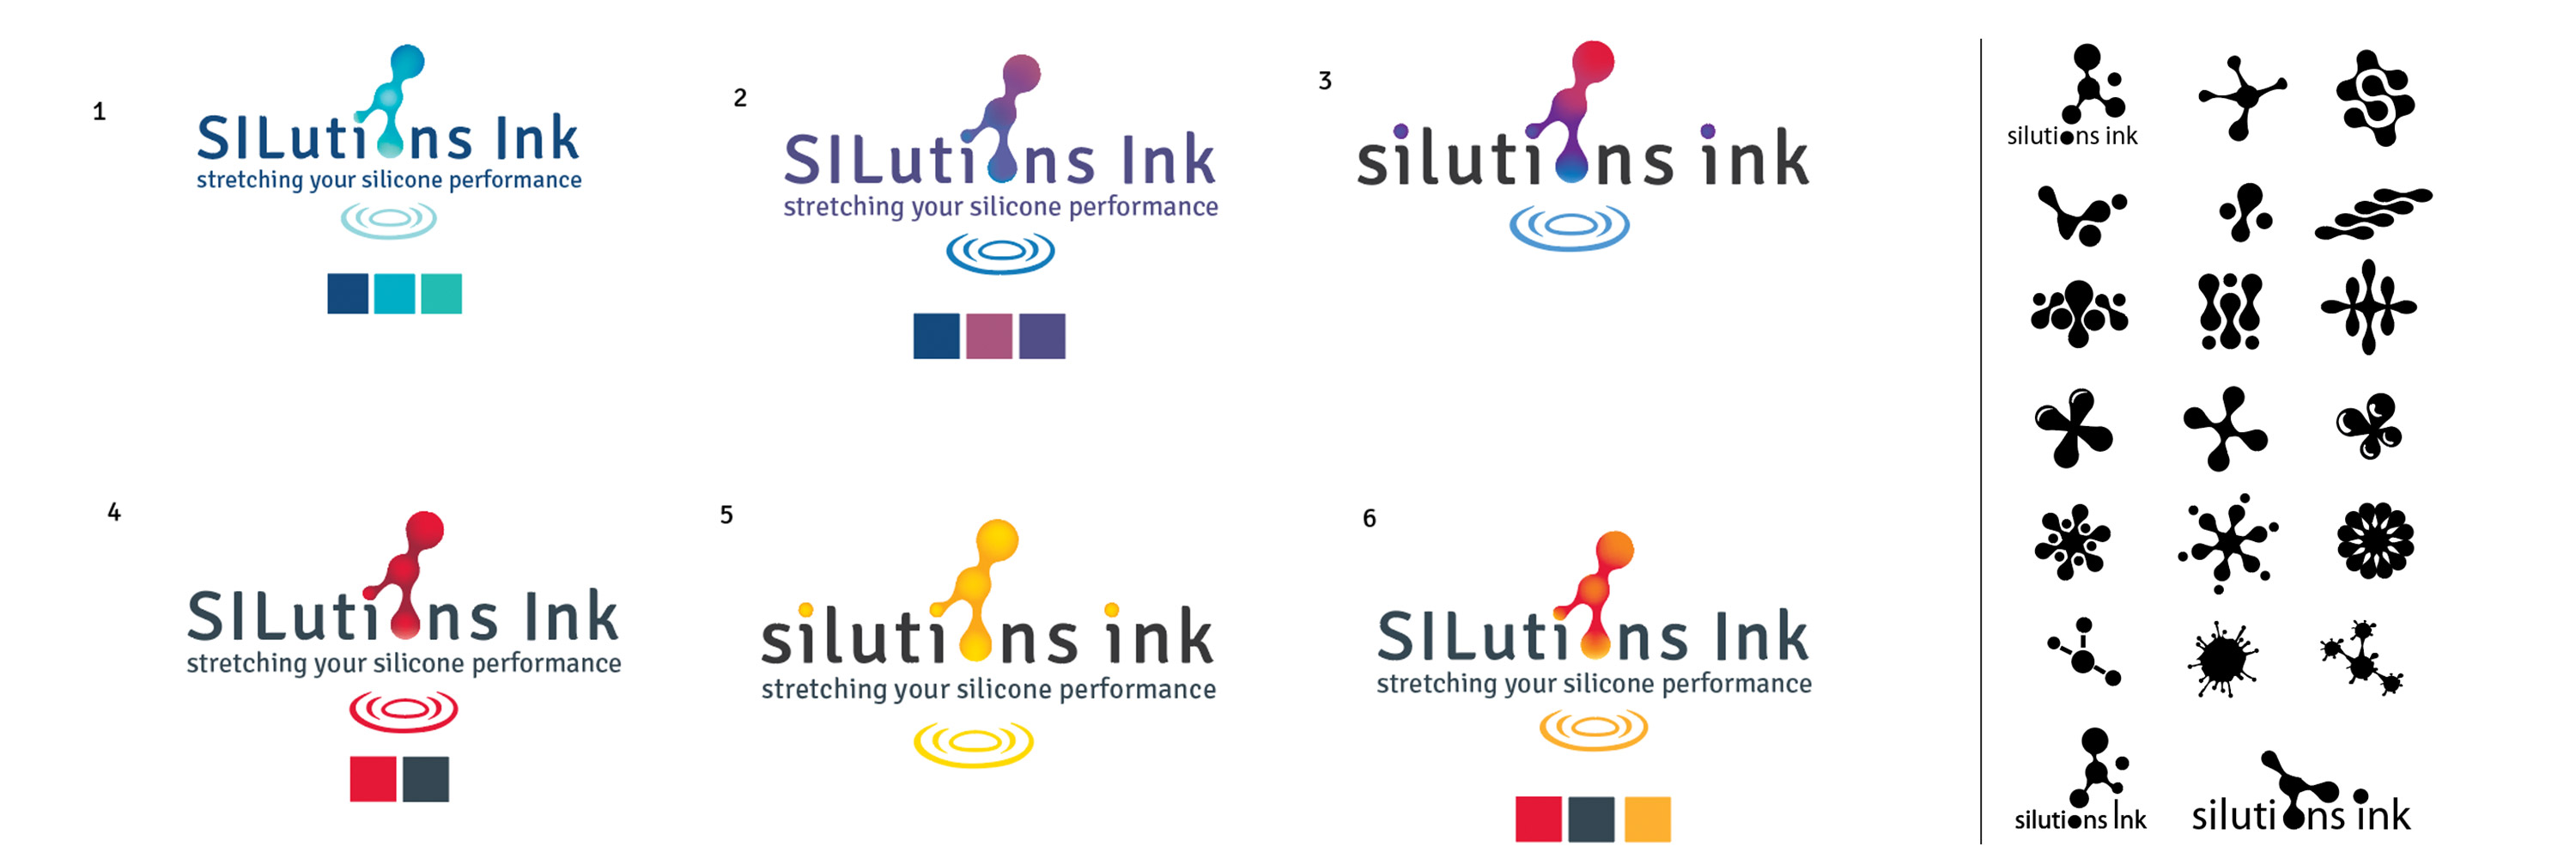 Silutions Ink Logo Concepts